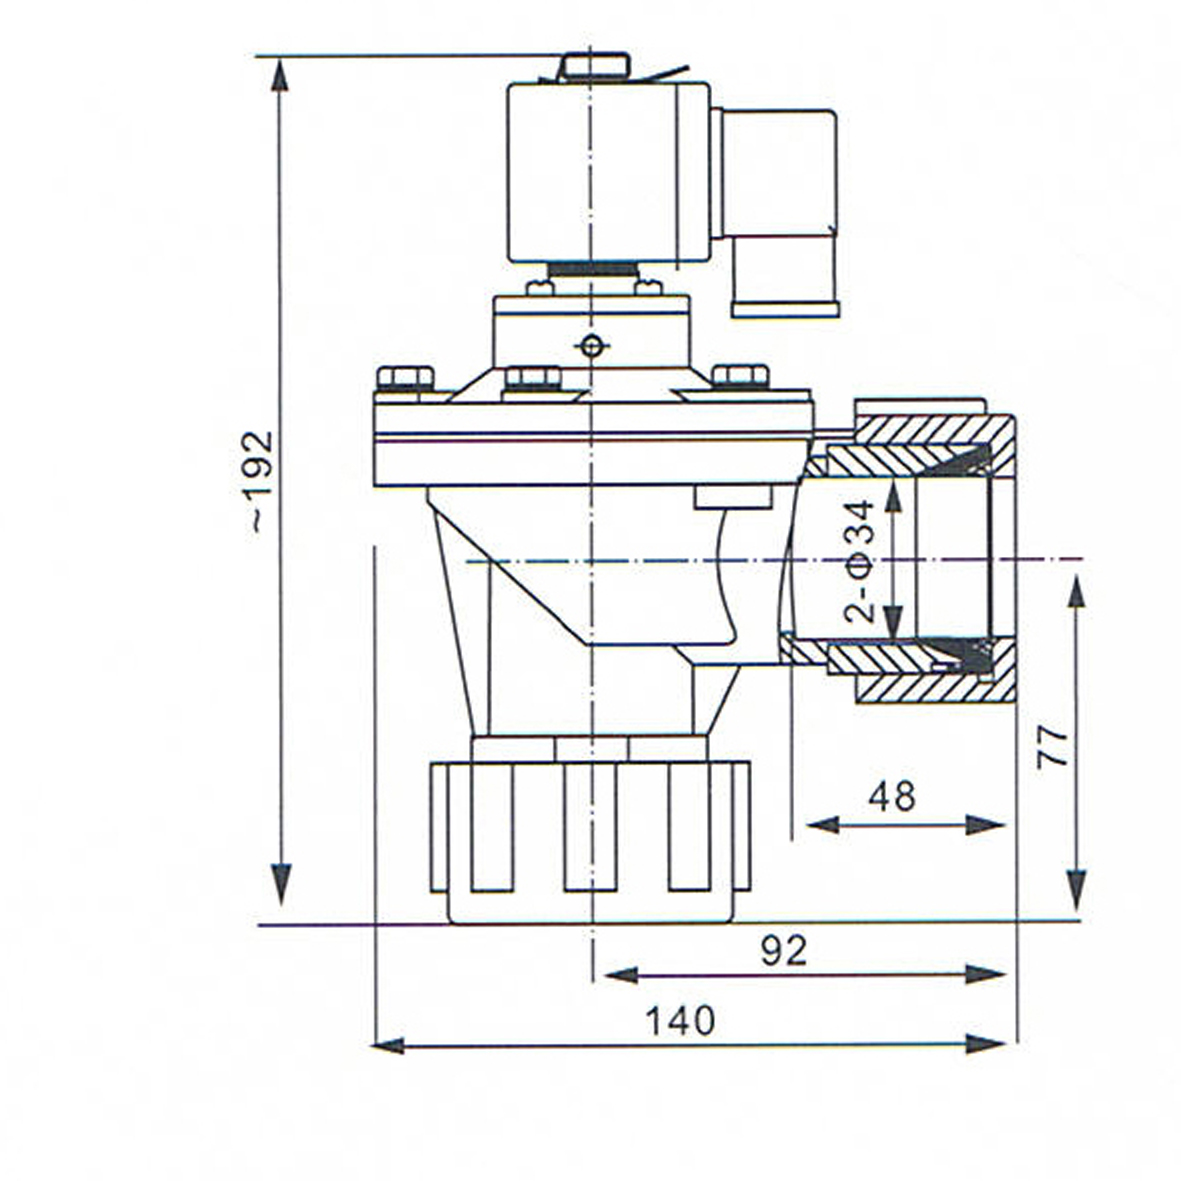 Overall Dimension of Pulse Valve DMF-ZM-25